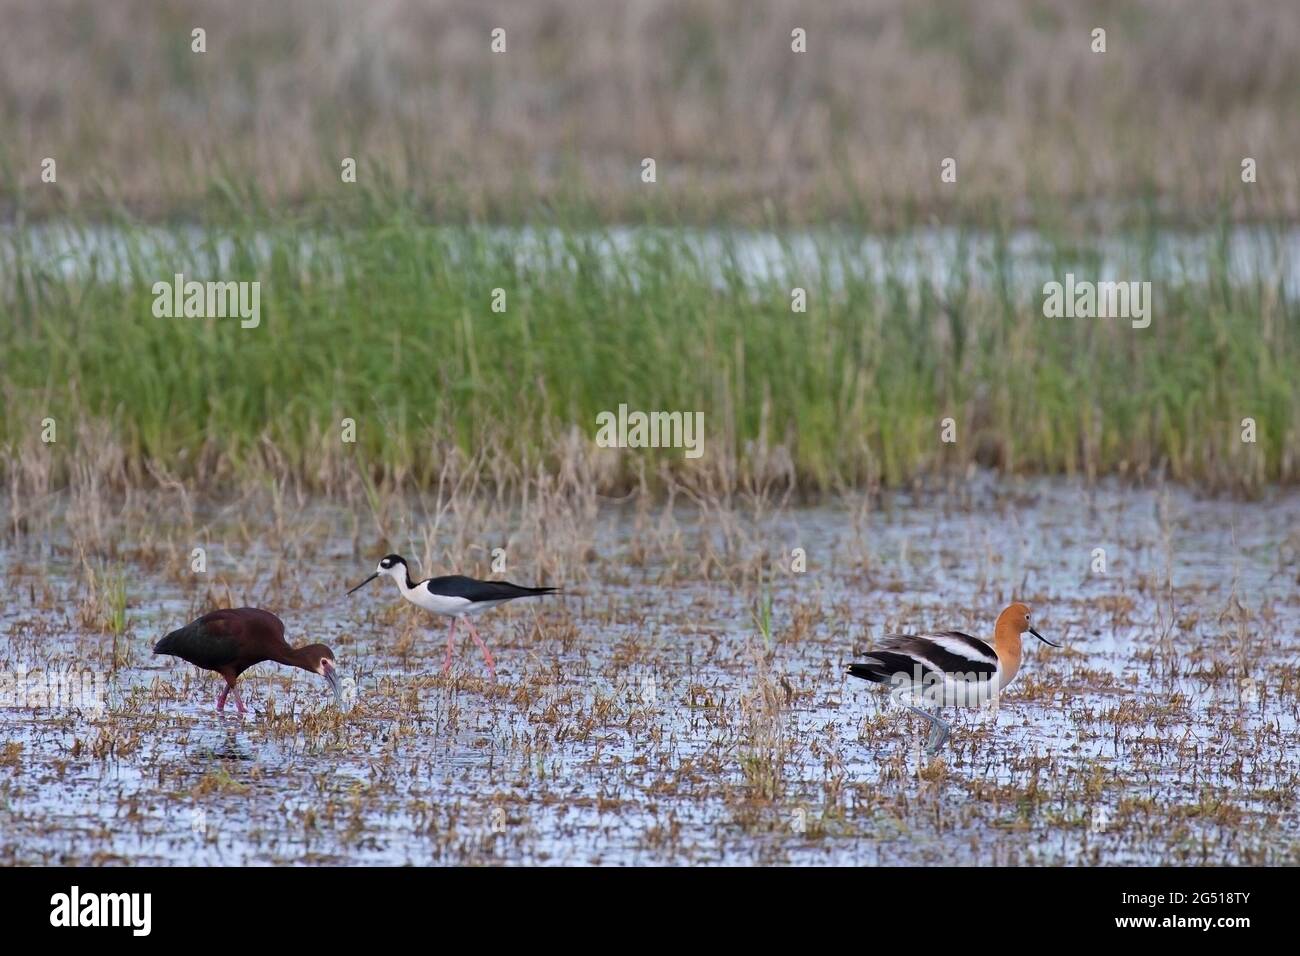 Three different species of shorebirds feeding in a slough on the Canadian prairies: White-faced Ibis, Black-necked Stilt and American Avocet Stock Photo